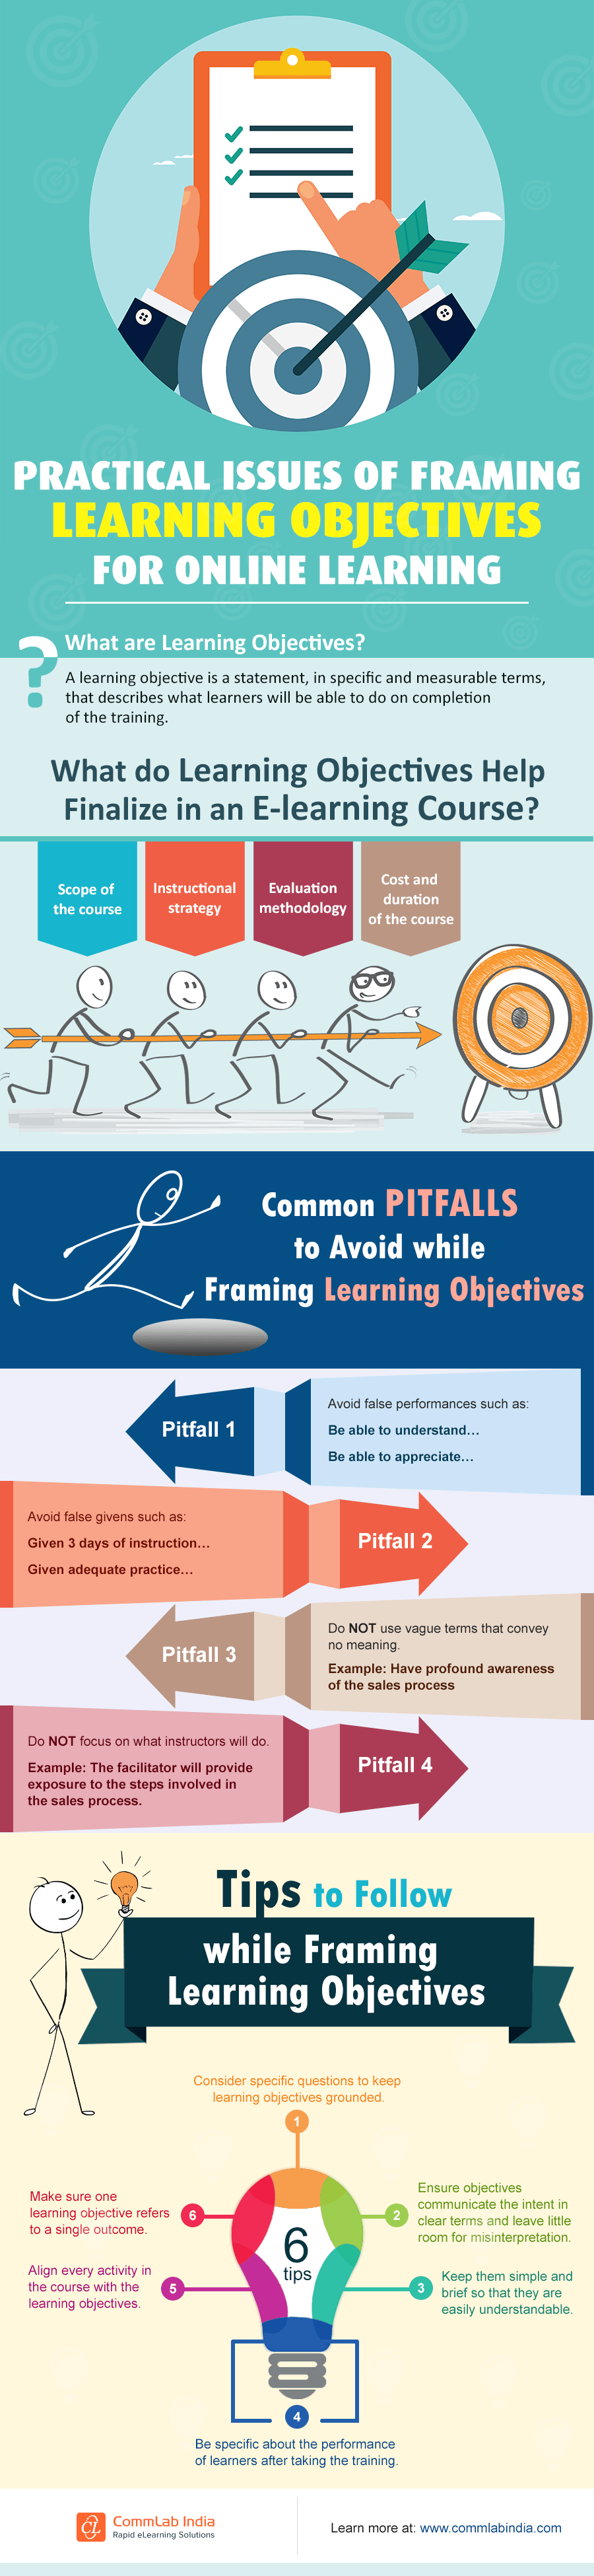 learning-objectives-for-online-learning-infographic